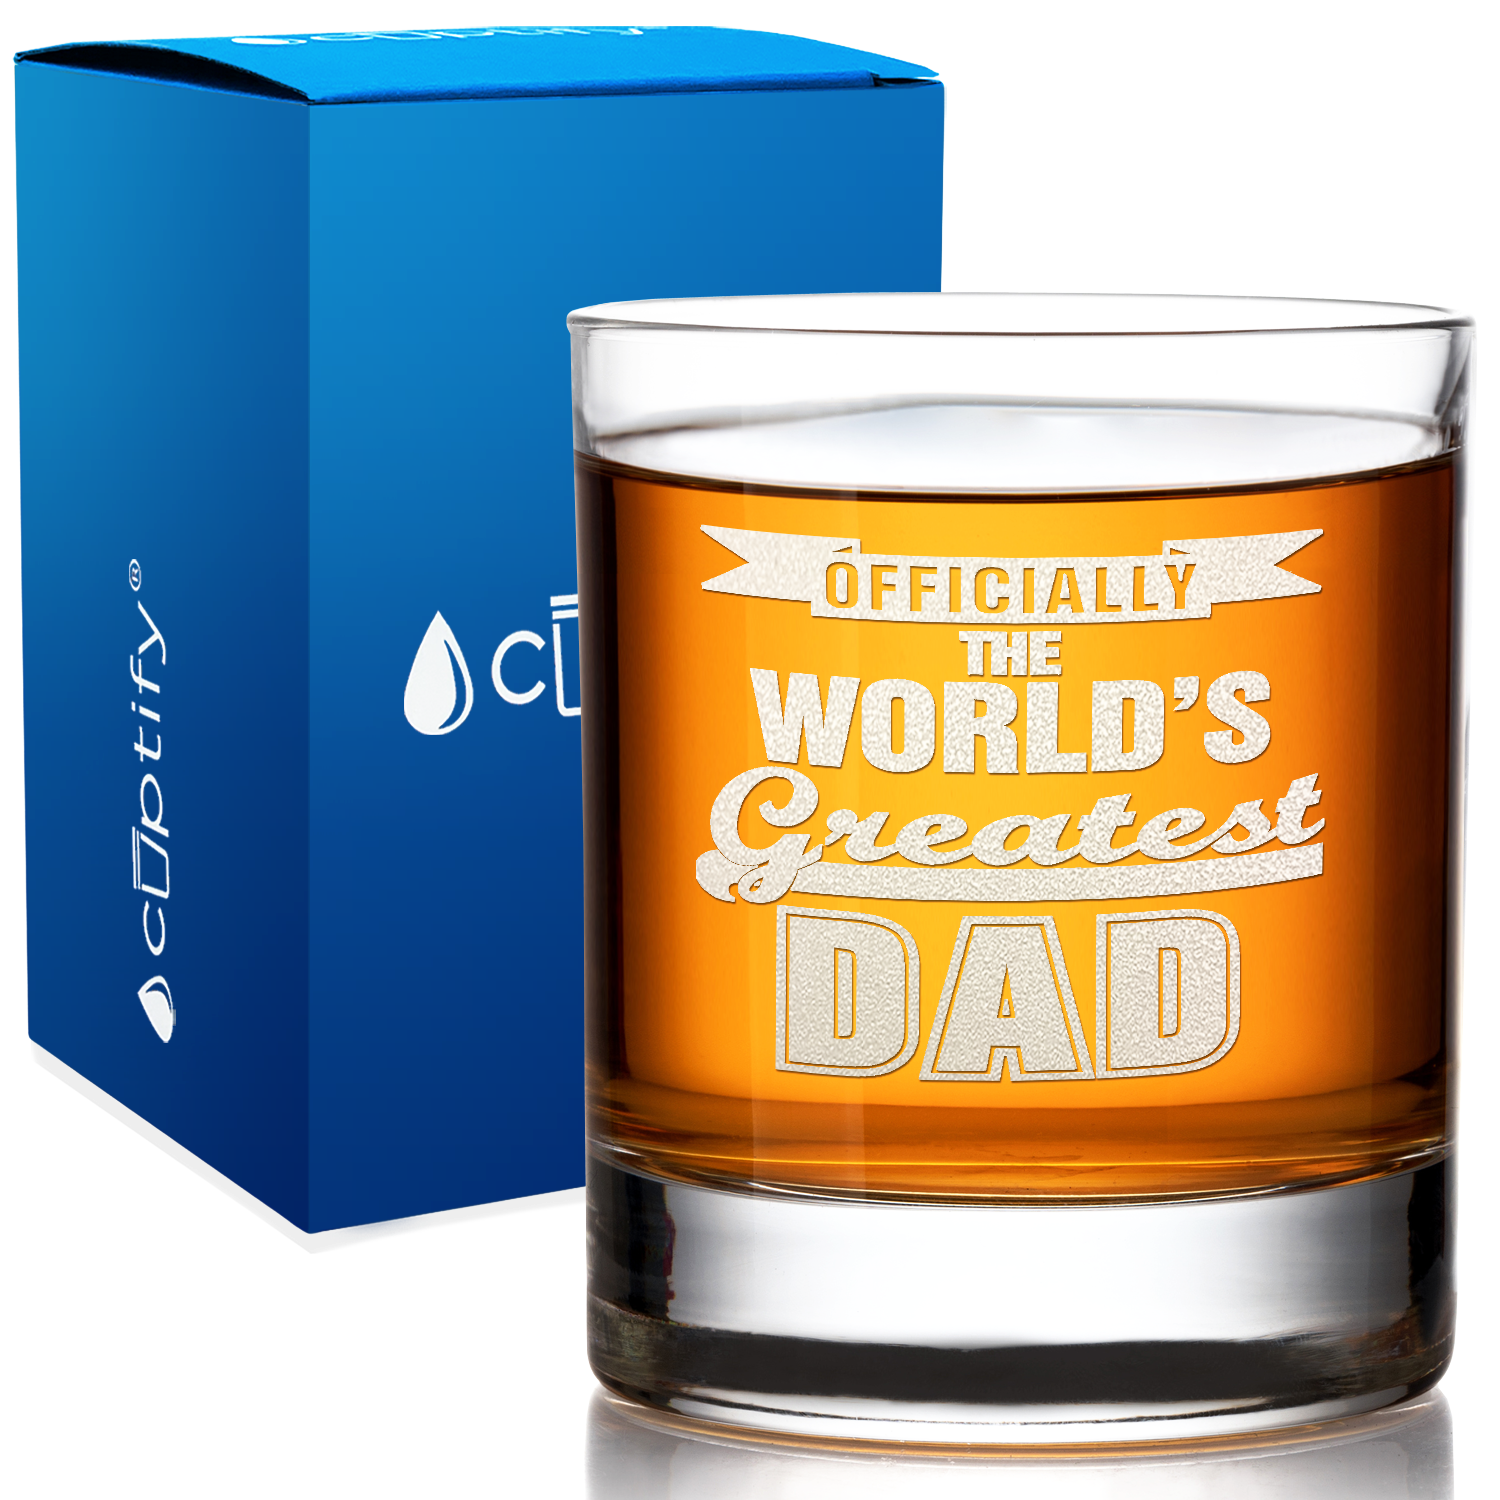 Officially the World's Greatest Dad on 10.25oz Old Fashioned Glass